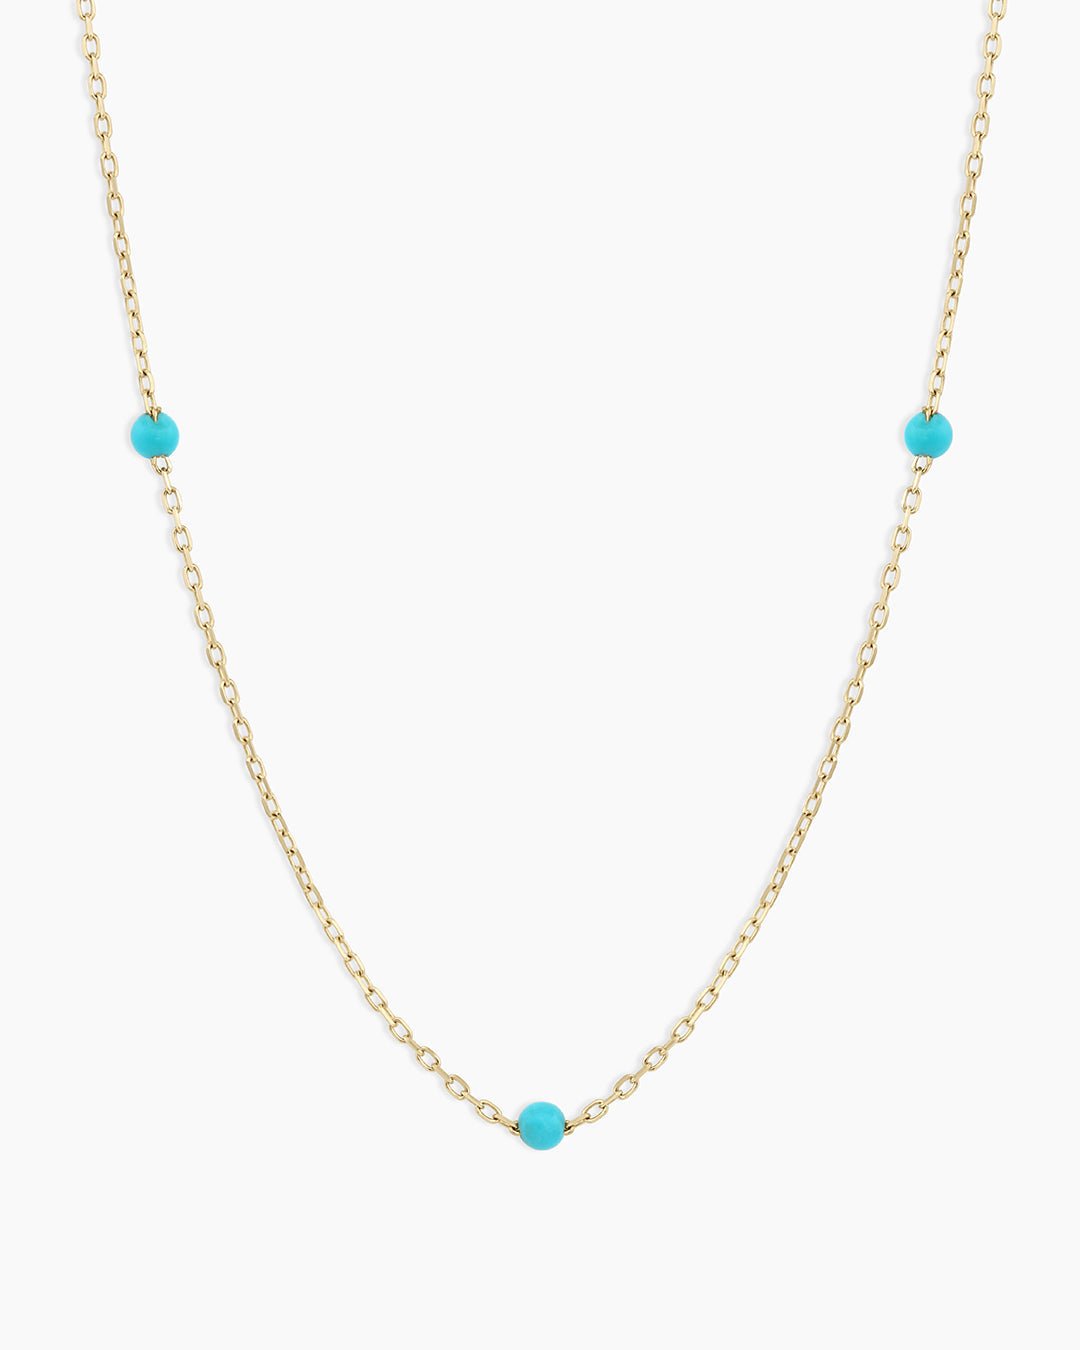 Turquoise Newport Necklace || option::14k Solid Gold, Turquoise - December